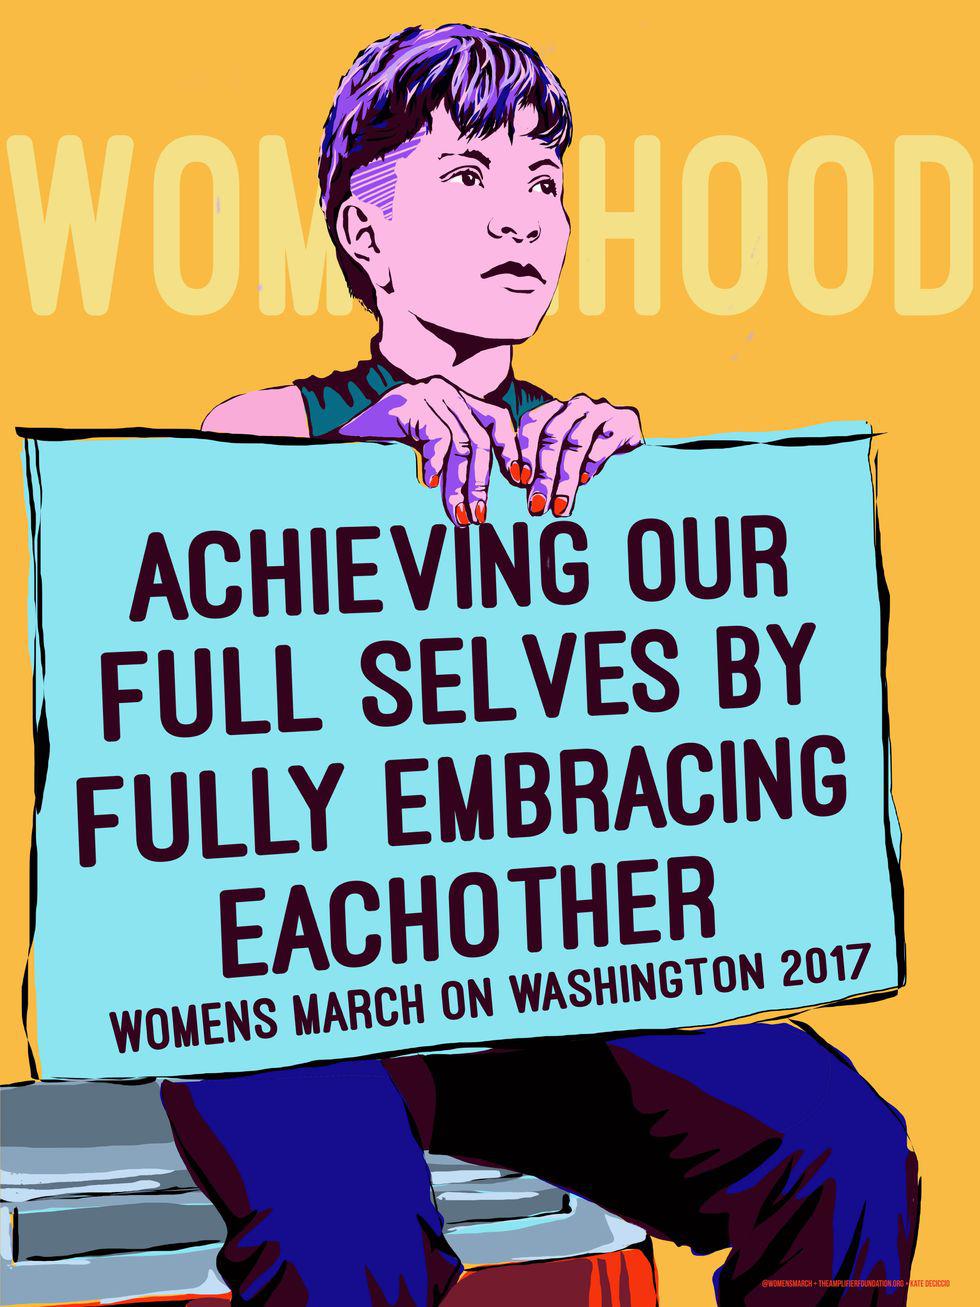 Women's March on Washington, Kate Diciccio, "Embracing Each Other"